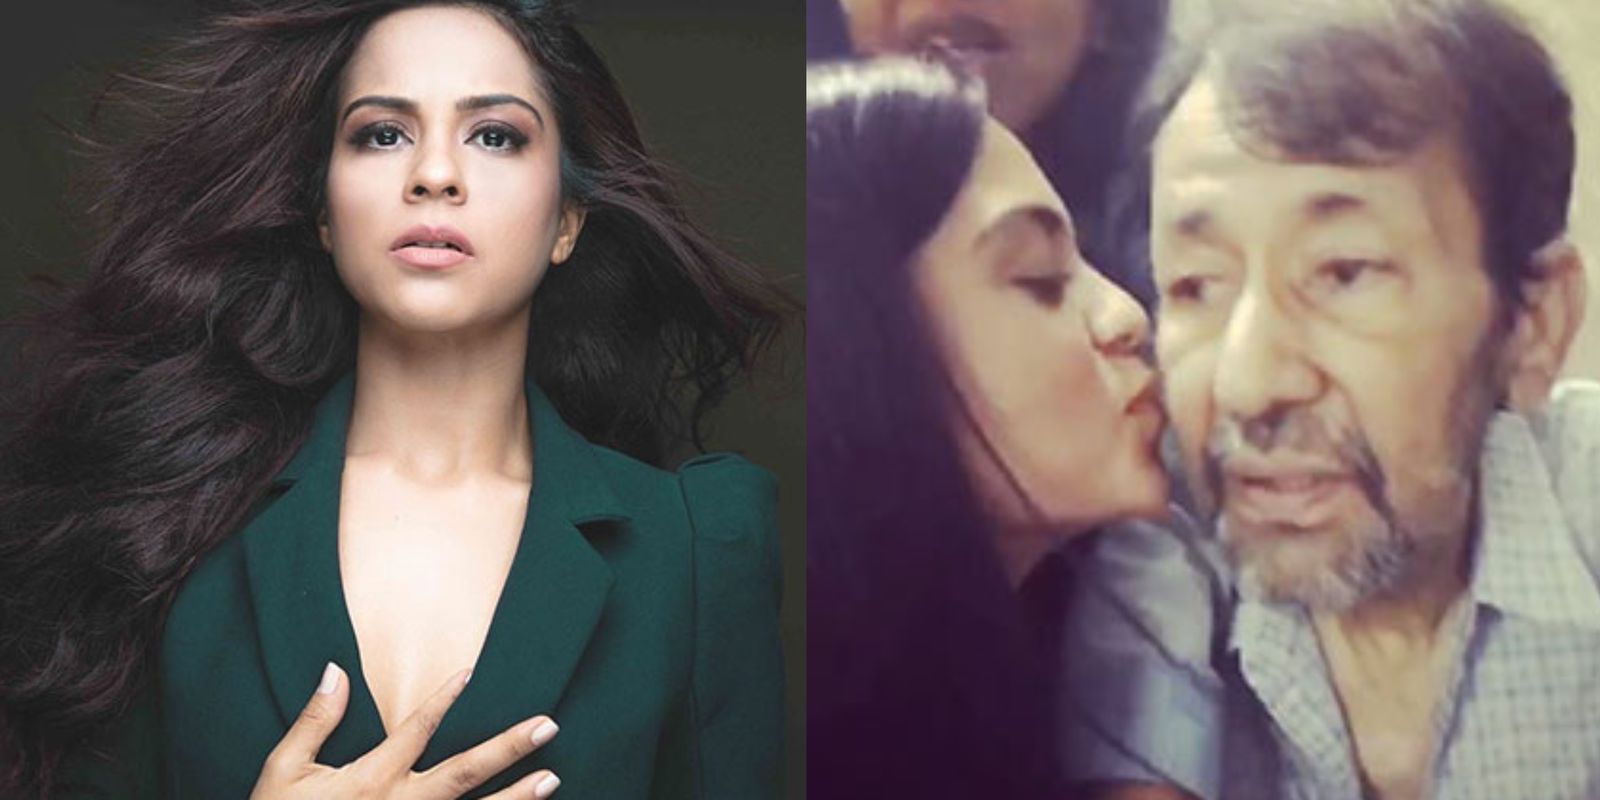 Actress Sana Saeed Reveals Her Father Passed Away On Janta Curfew Day While She Was Stuck In LA Due To Coronavirus Pandemic